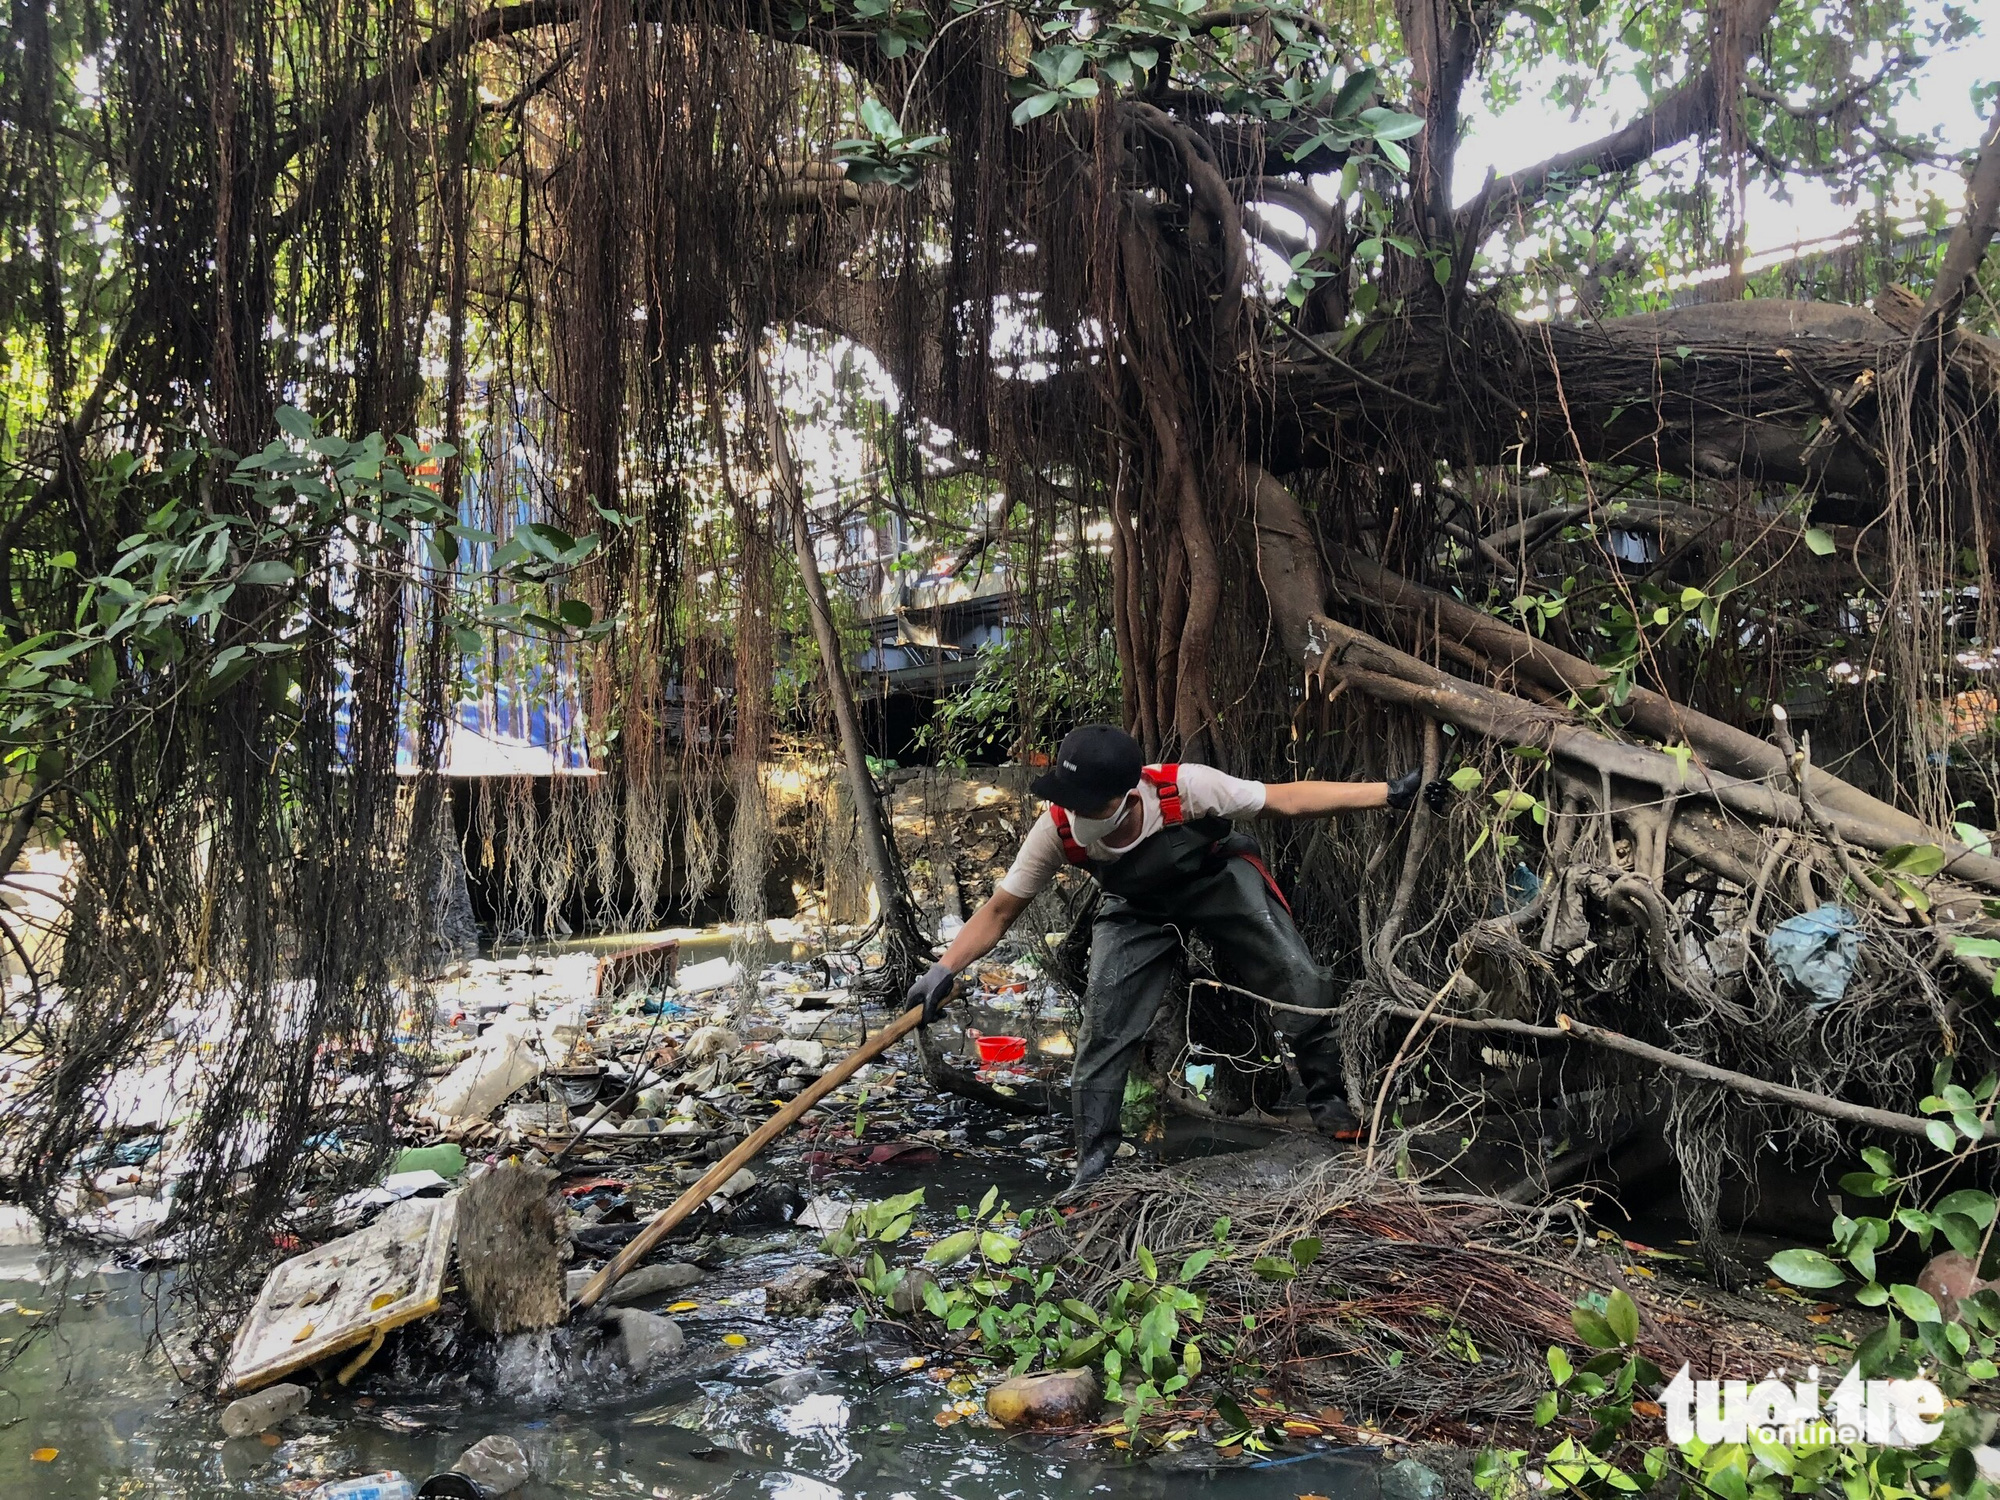 ‘Many canals and ditches are deep, so we are unable to wade into the water to pick up all the garbage. We sometimes fall into canals while trying to rake waste,’ Nhan retold.